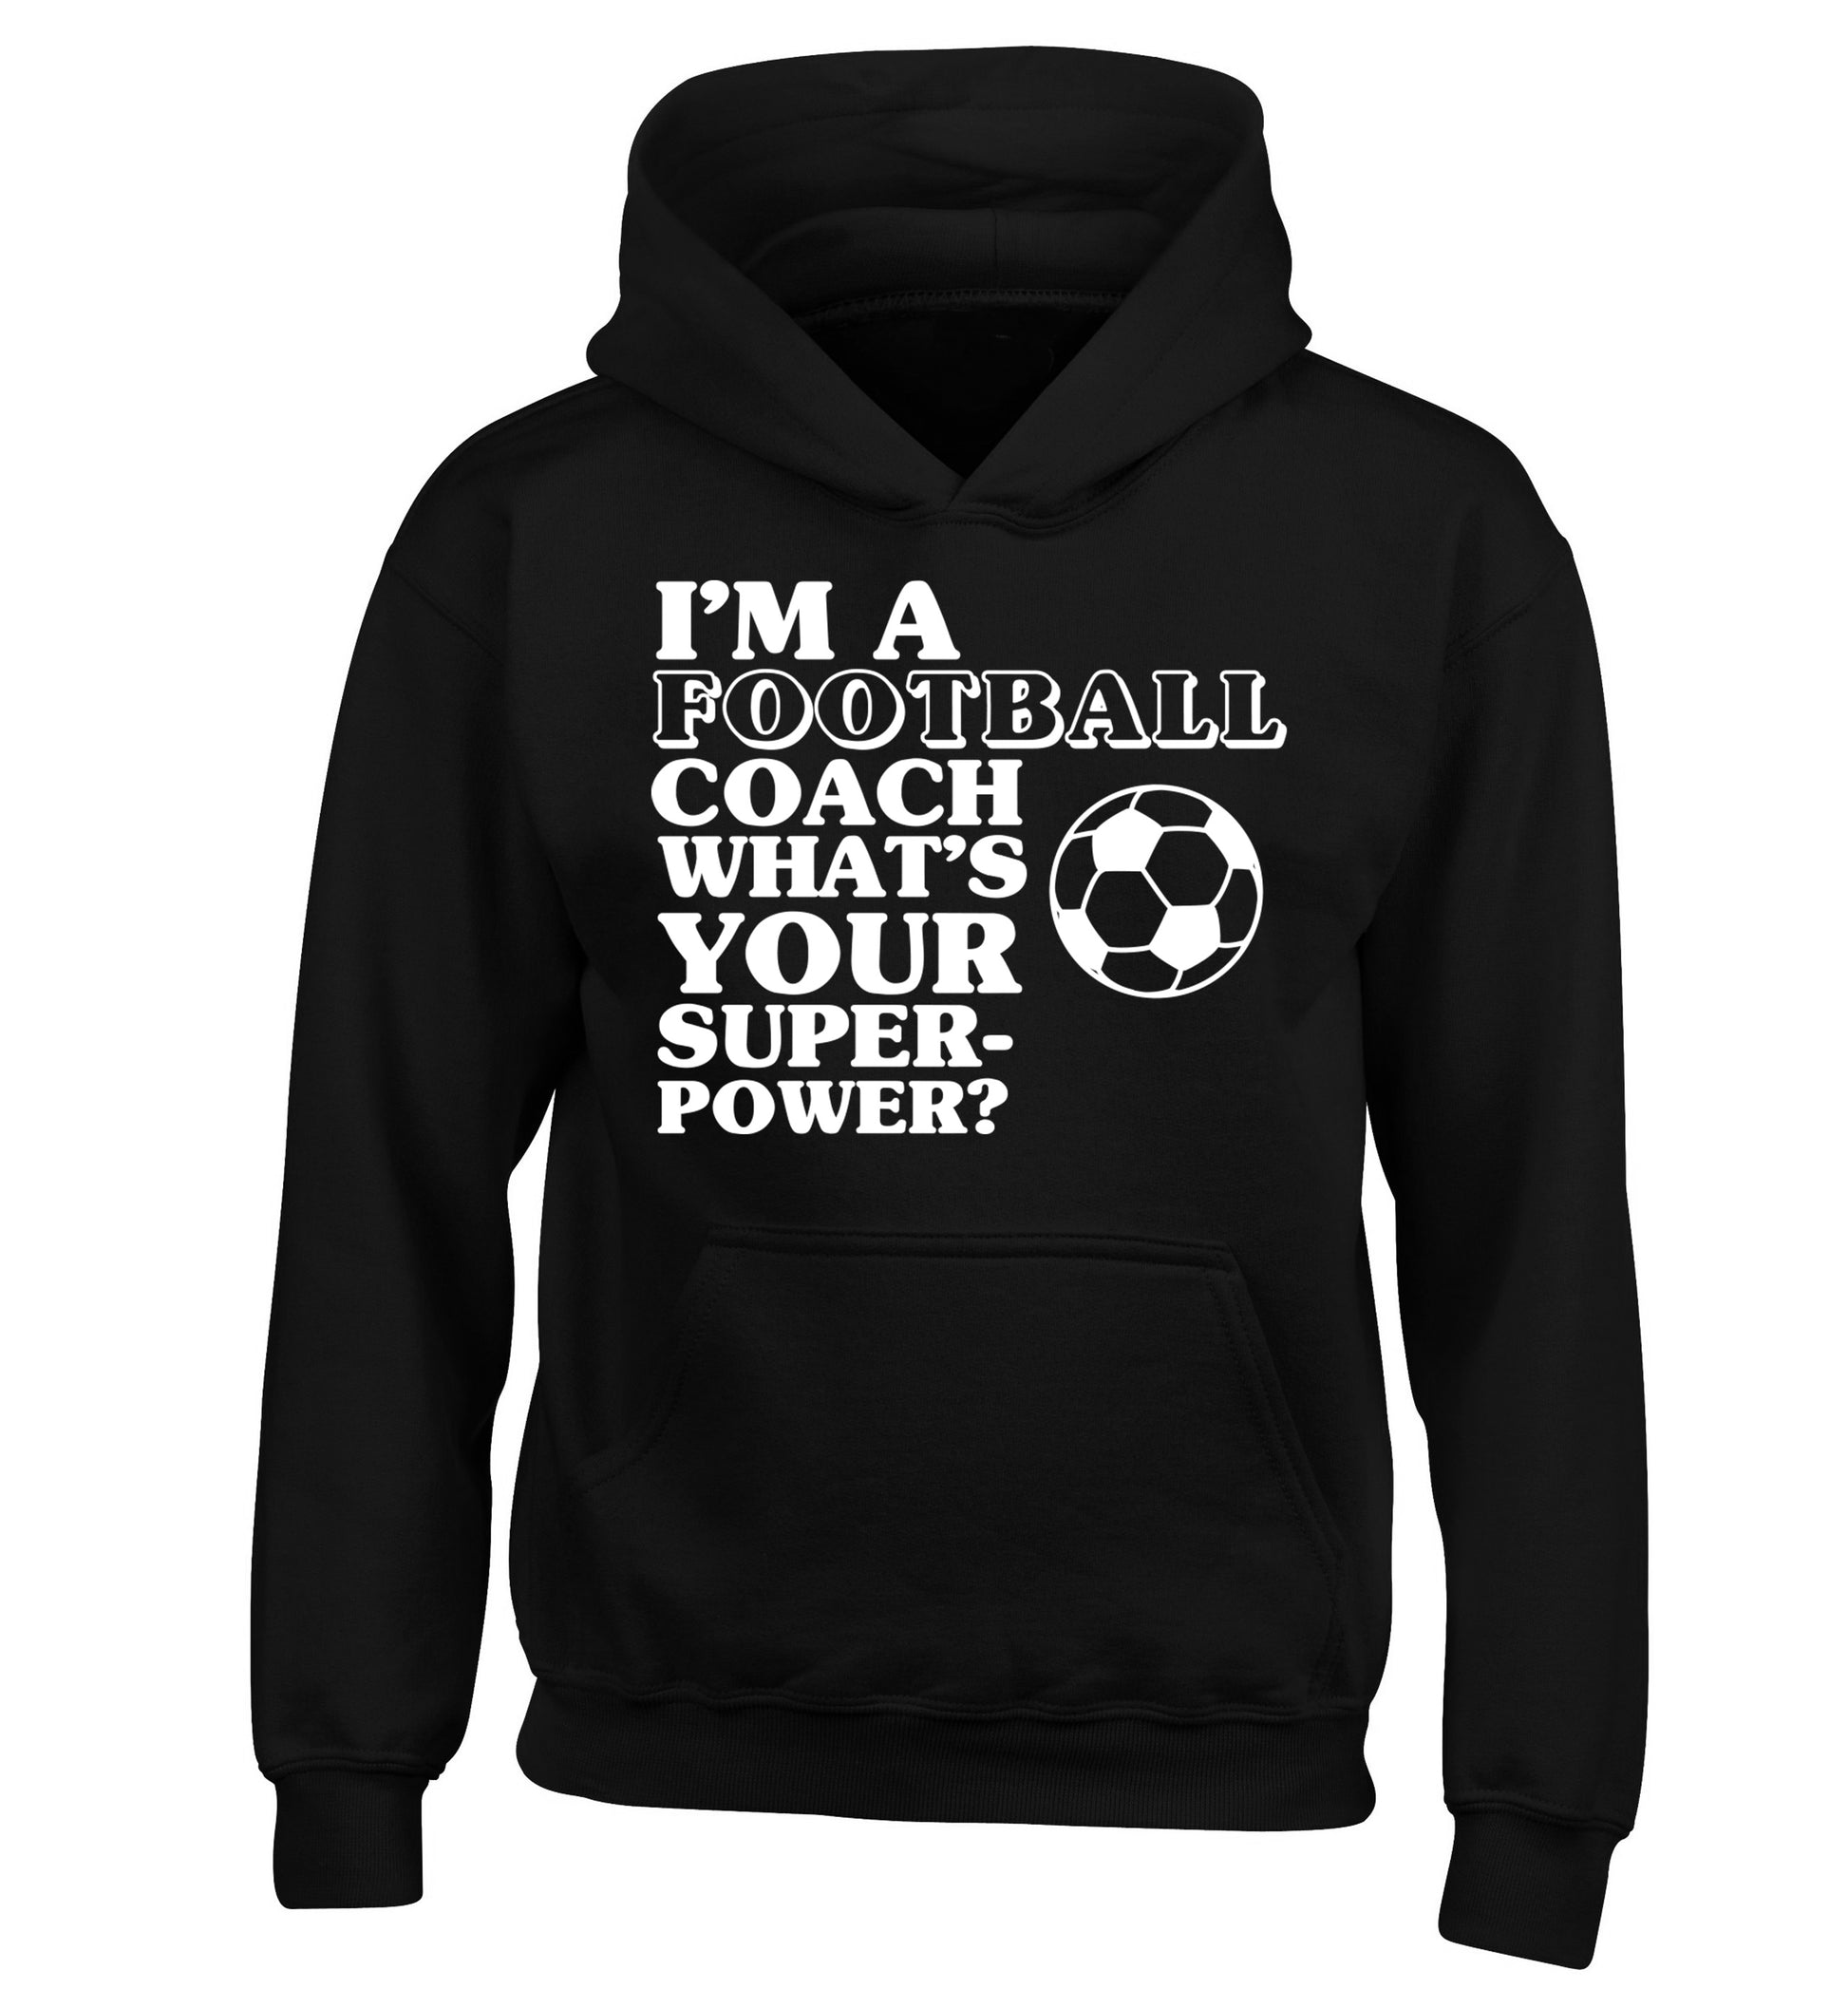 I'm a football coach what's your superpower? children's black hoodie 12-14 Years